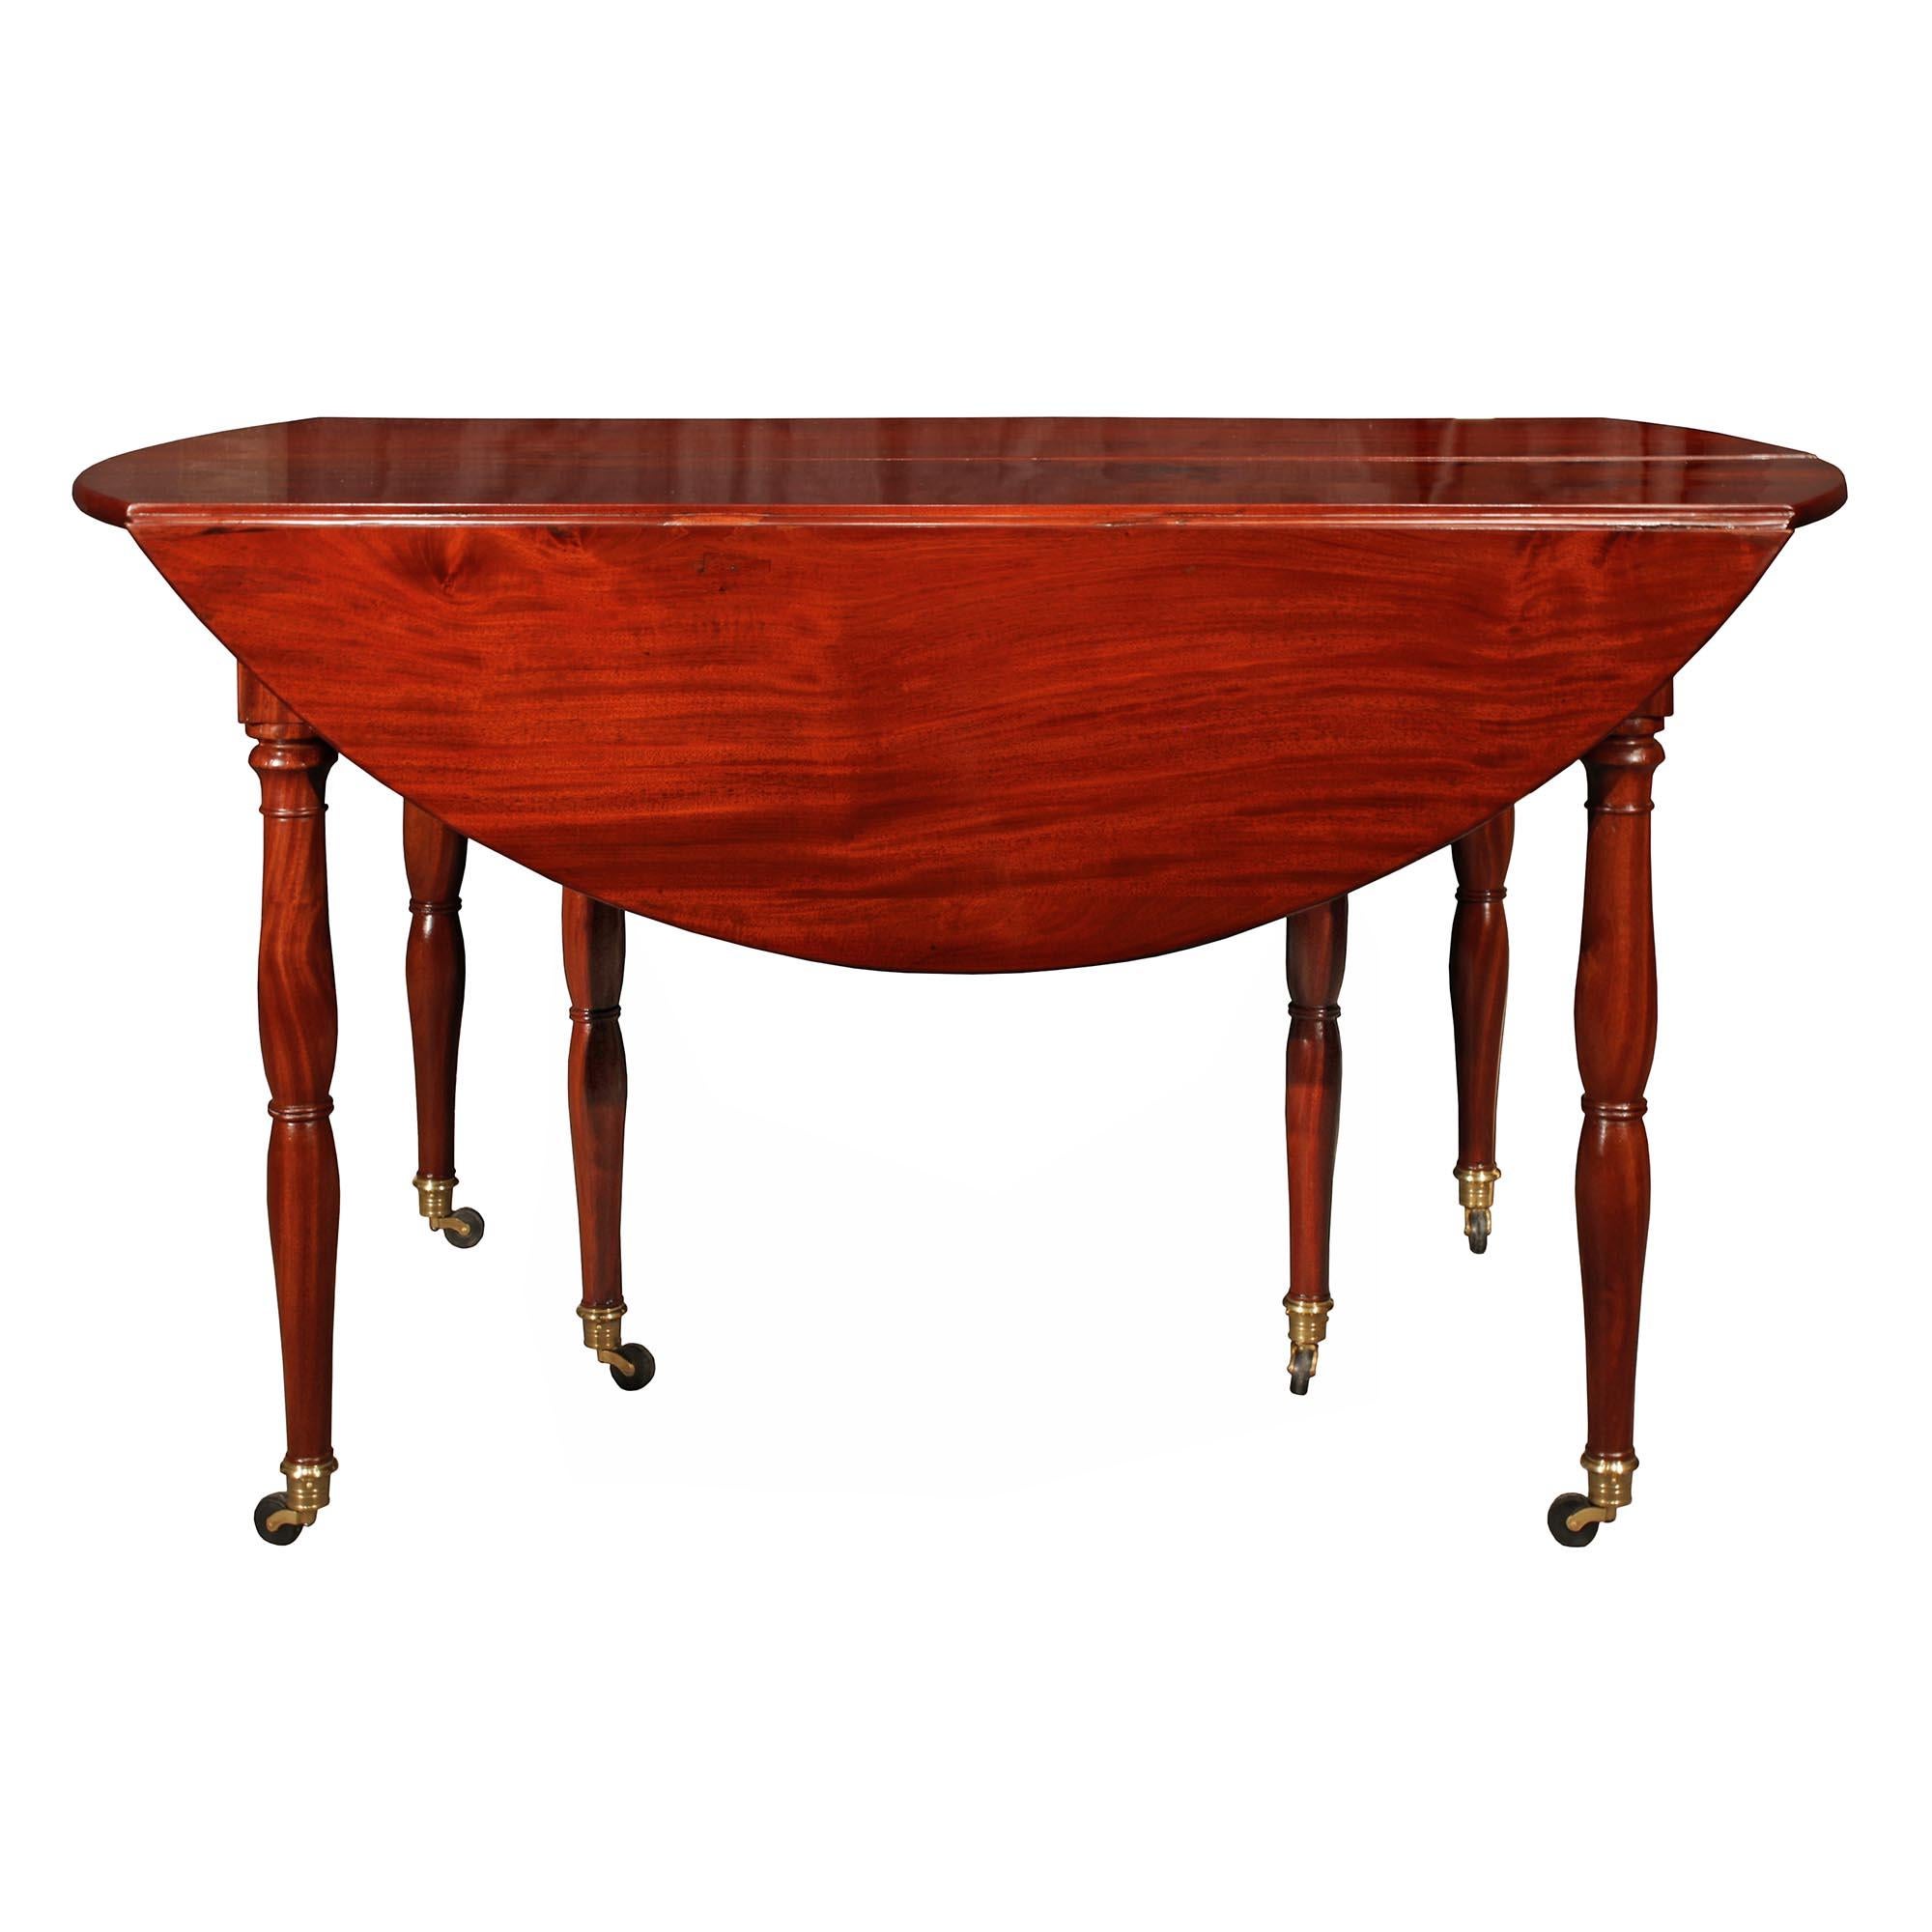 A handsome French Louis XVI st. mahogany drop leaf dining table. The table is raised on six original brass casters below the tapered baluster shaped legs. Rich warm grain and patina throughout and with three extensions measuring 21.5 each.